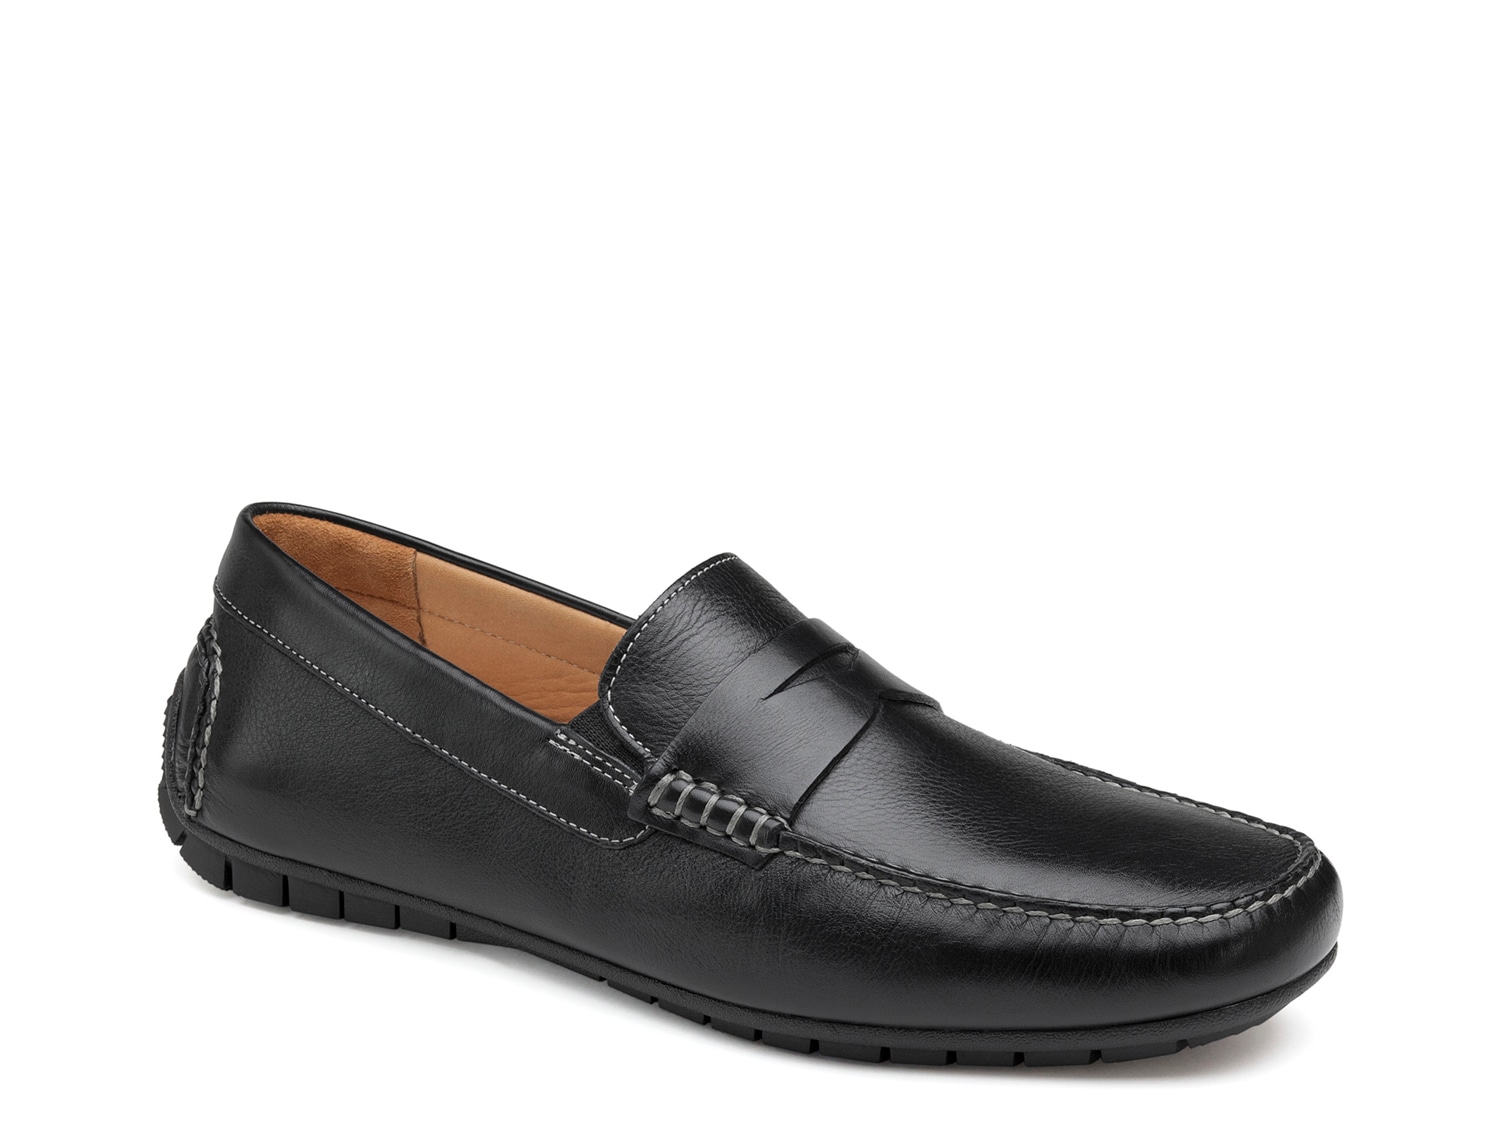 Johnston & Murphy Cort Penny Loafer - Free Shipping | DSW